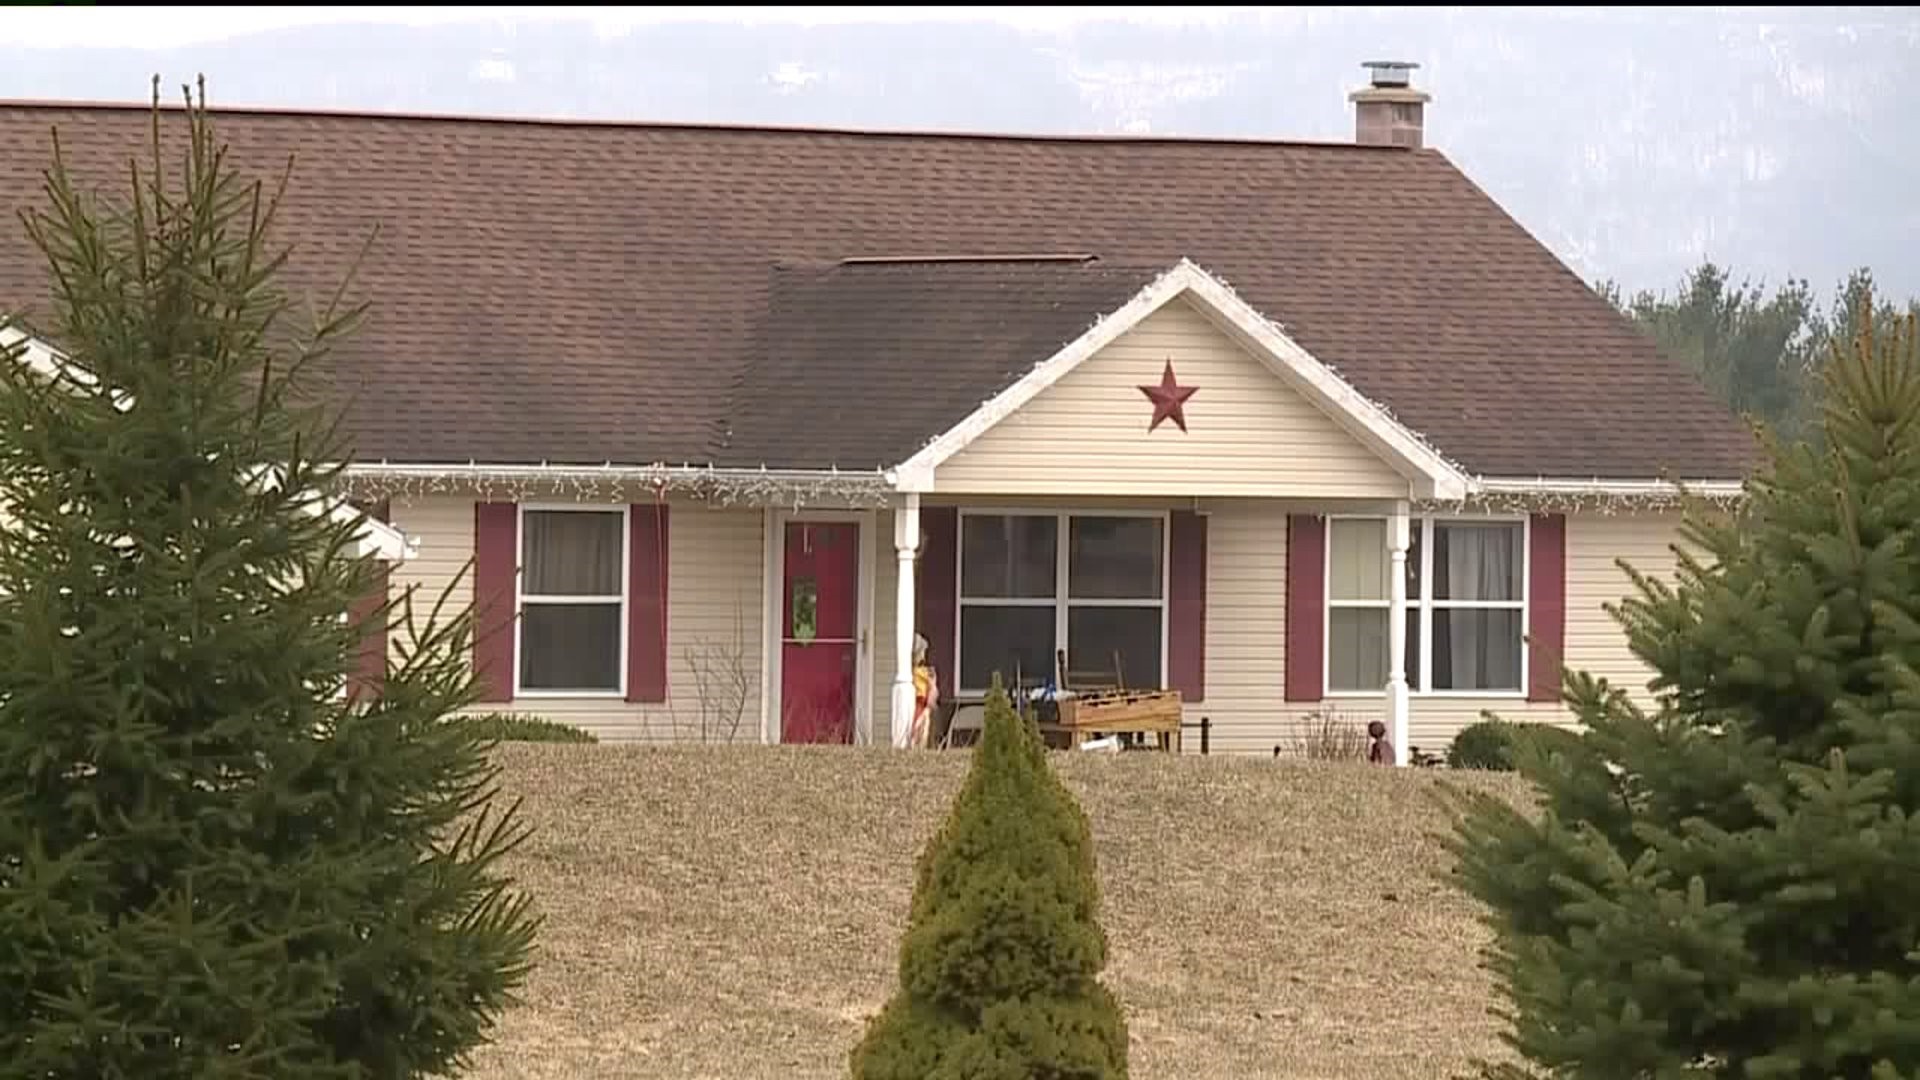 Armed Homeowner Chases Away Intruder